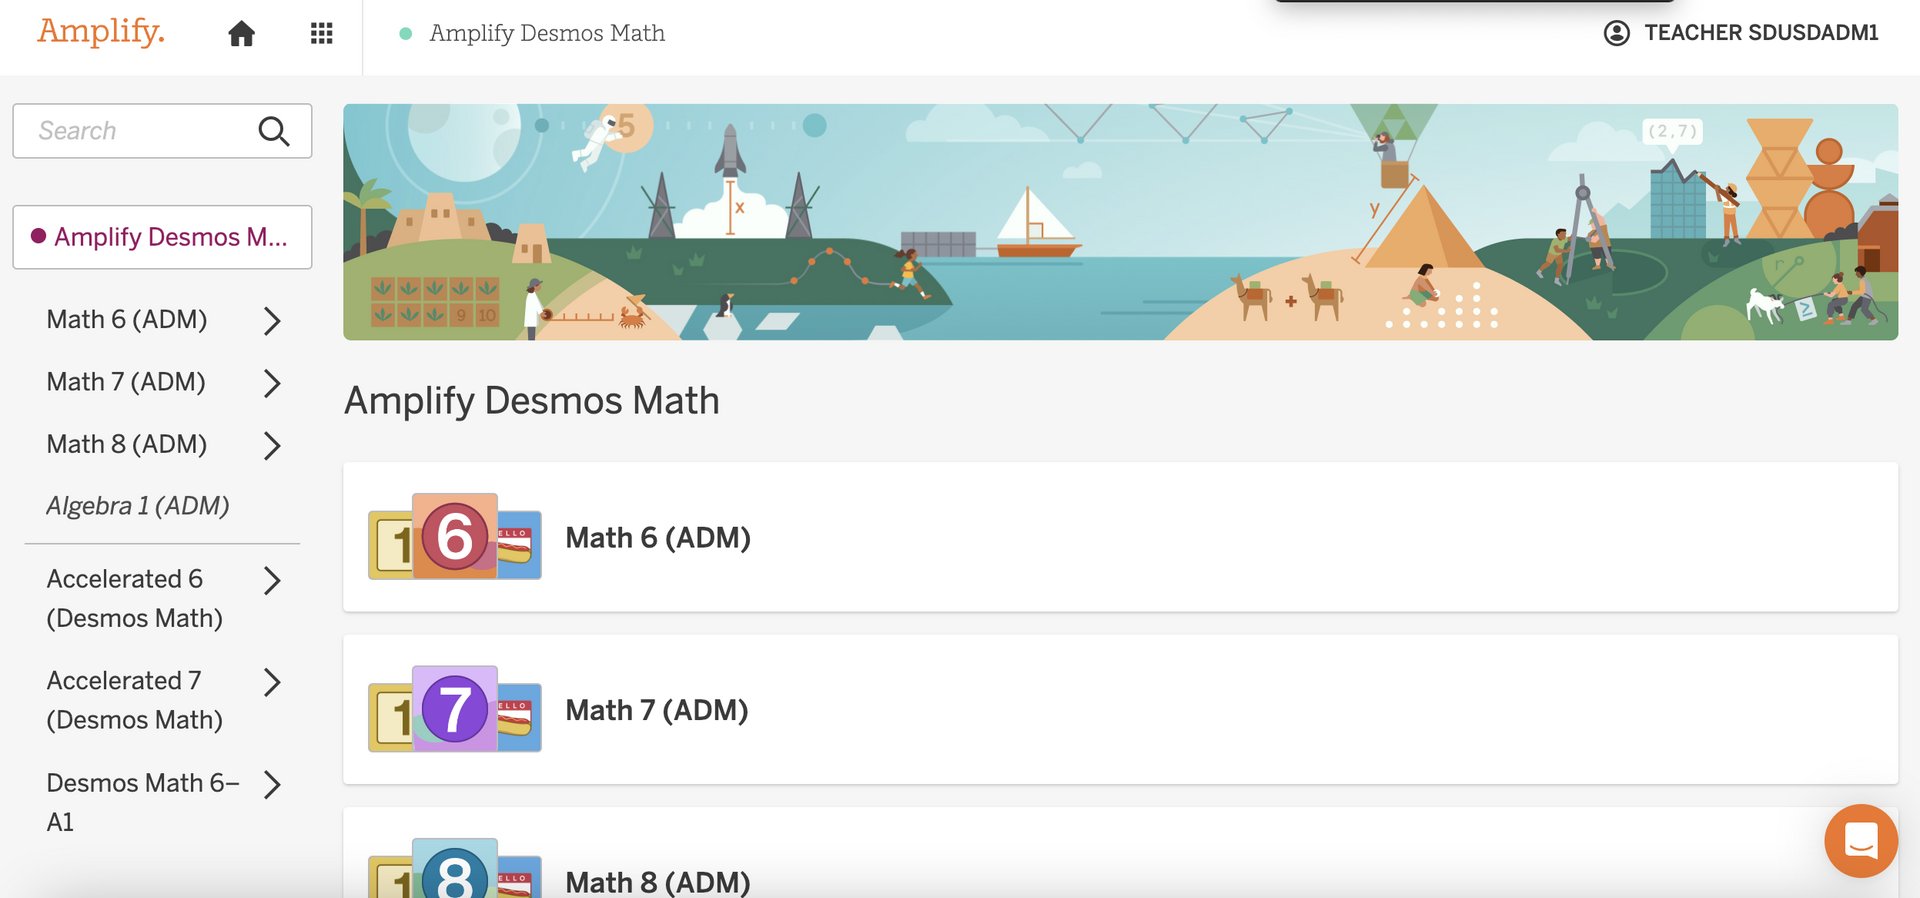 Educational website displaying colorful banners for math courses (math 6, math 7, math 8), with whimsical illustrations featuring animals and nautical themes.